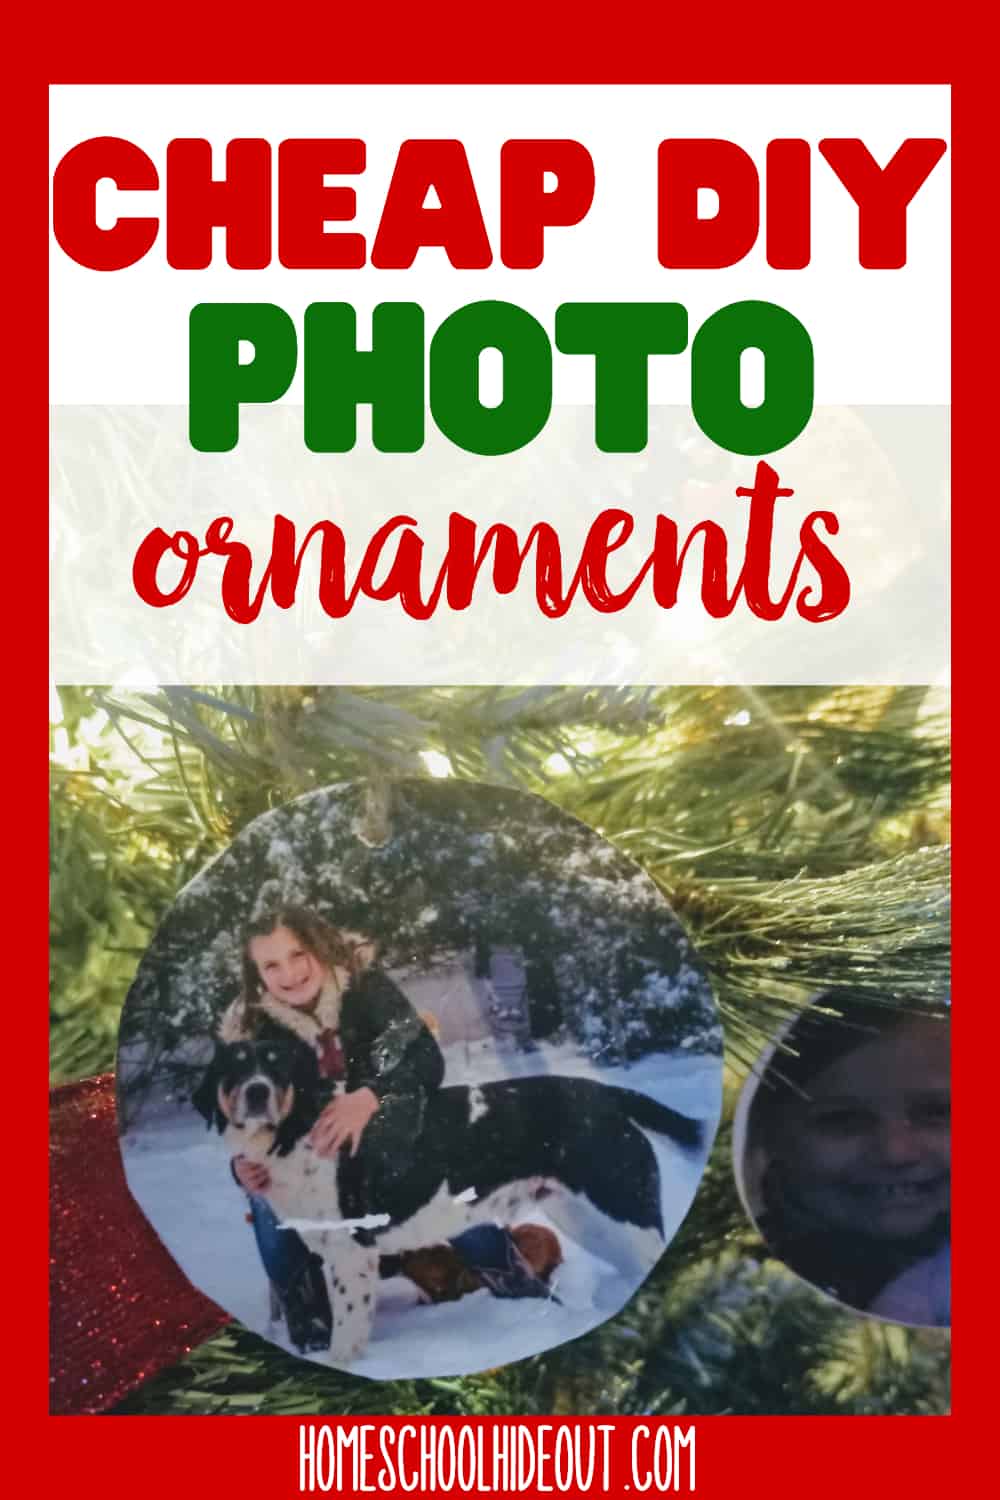 These cheap DIY photo ornaments are perfect for our growing family! So cute and easy! #handmade #Christmas #ornaments #photogifts #personalized #gift